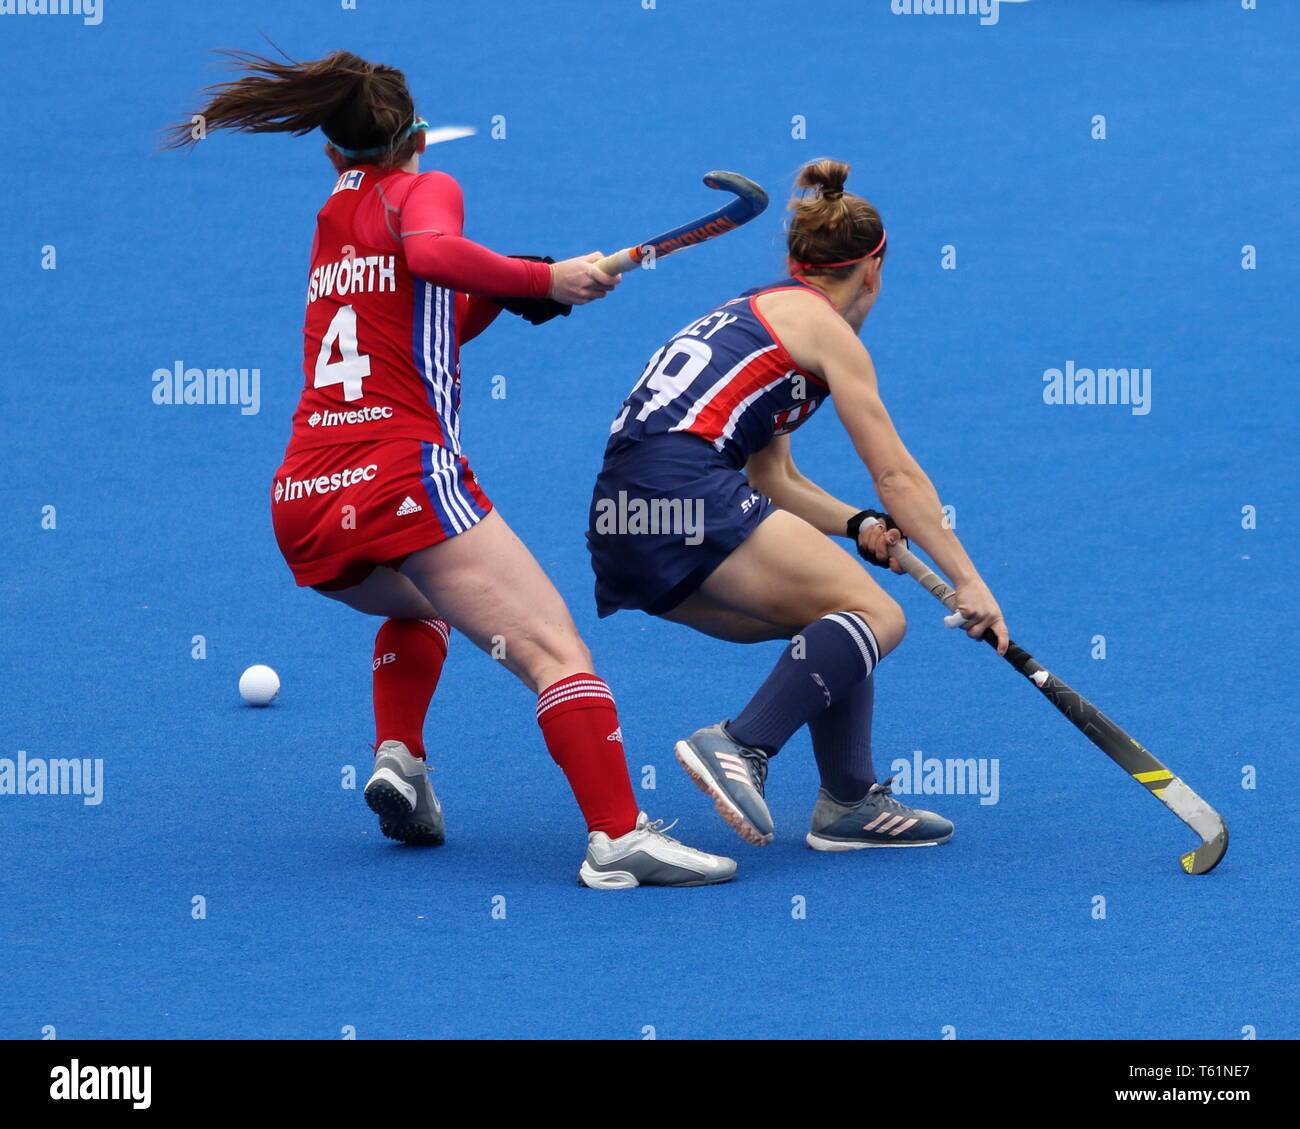 Laura Unsworth (GBR) and Alyssa Manley (USA) in the 2019 FIH Pro League Great Britain v United States women’s hockey match at the Olympic Park, London Stock Photo